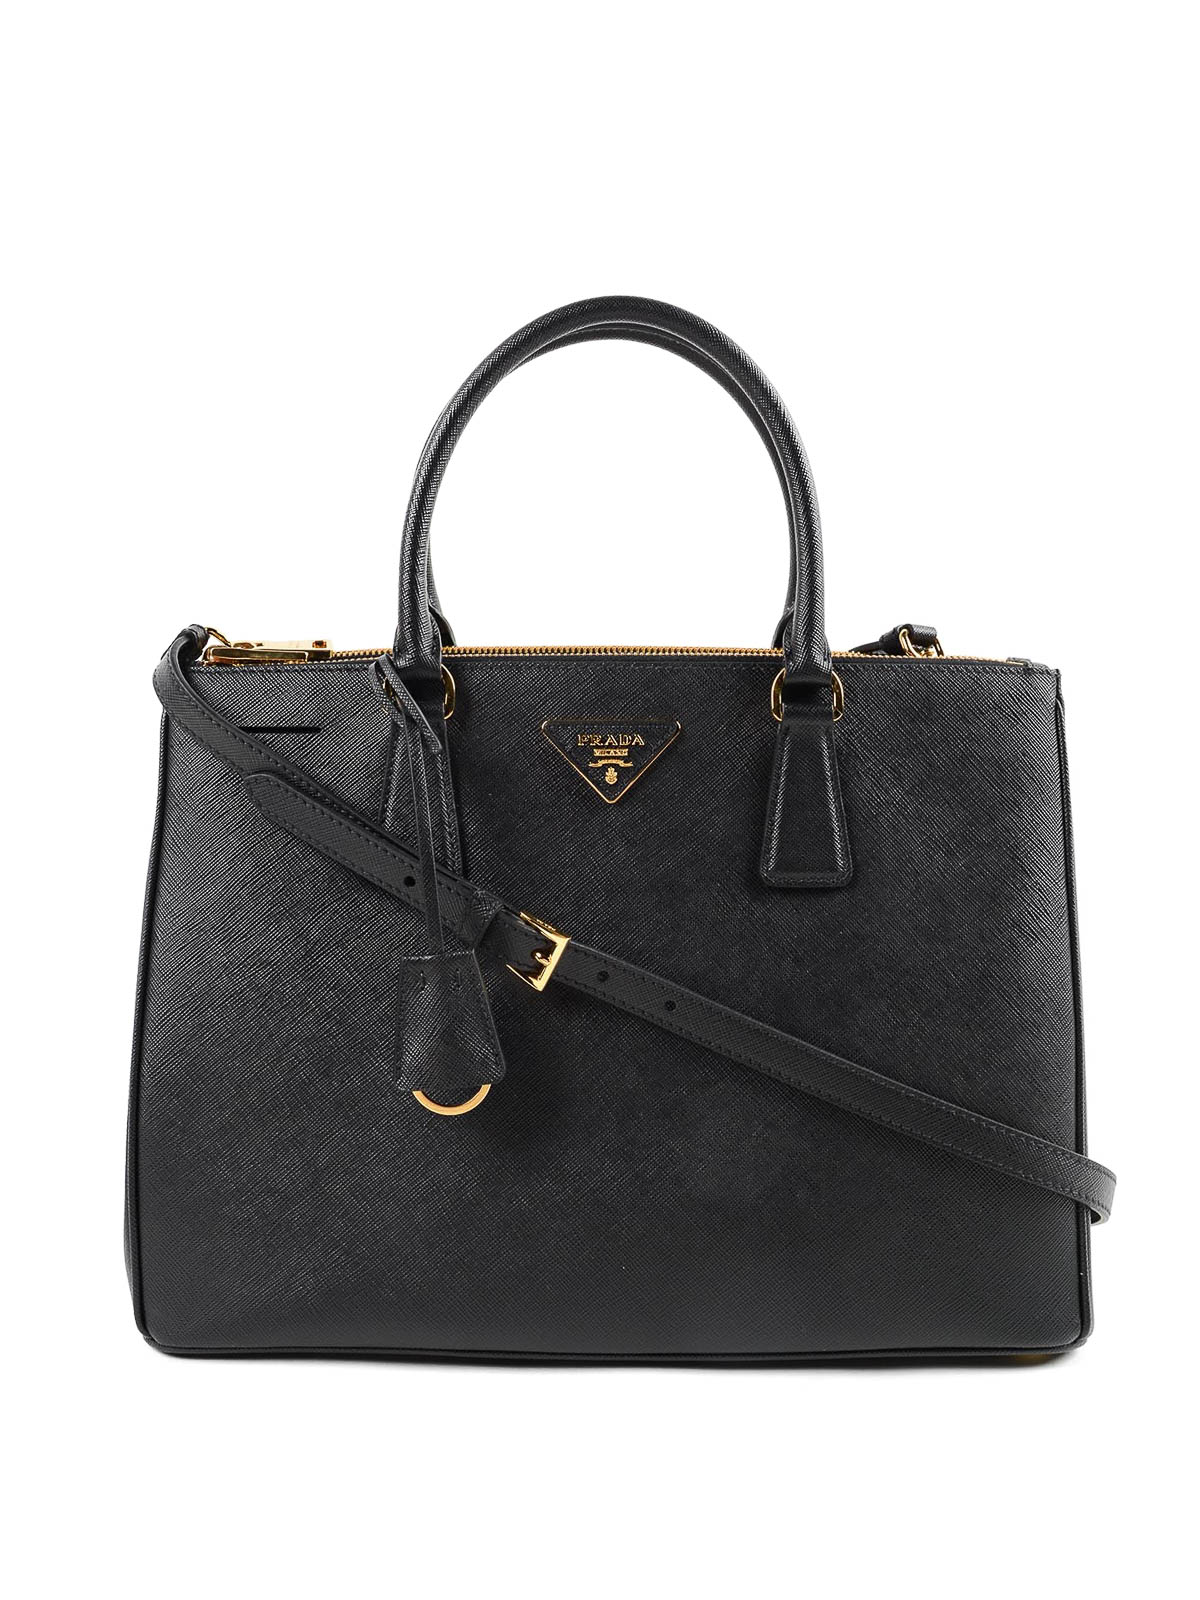 Galleria saffiano leather tote by Prada - totes bags | iKRIX